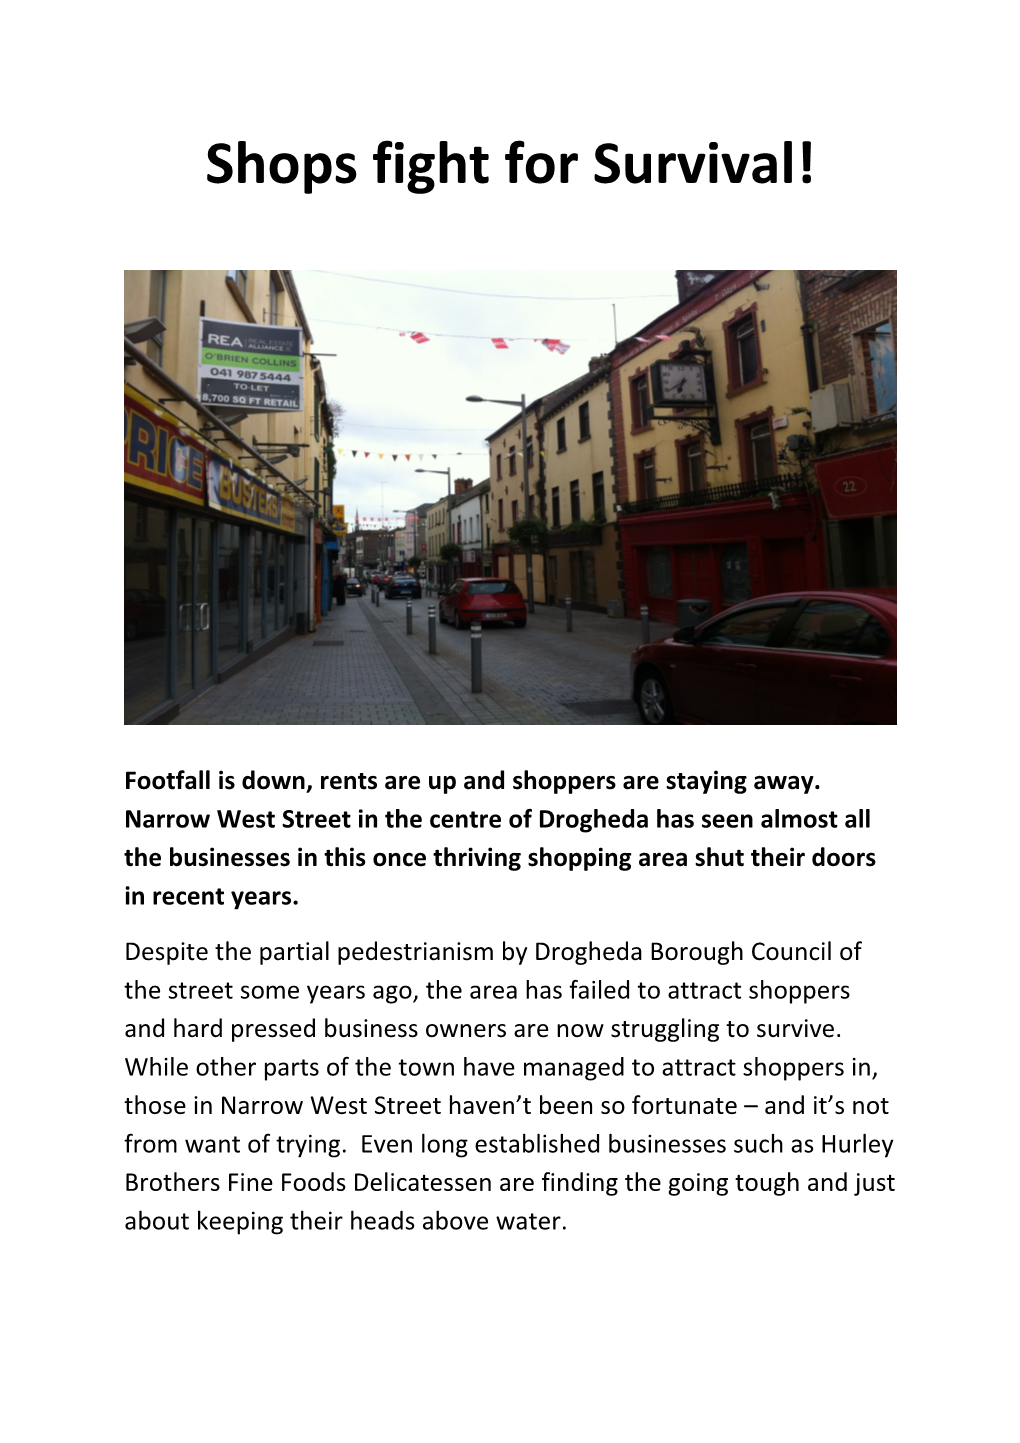 Footfall Is Down, Rents Are up and Shoppers Are Staying Away. Narrow West Street in The